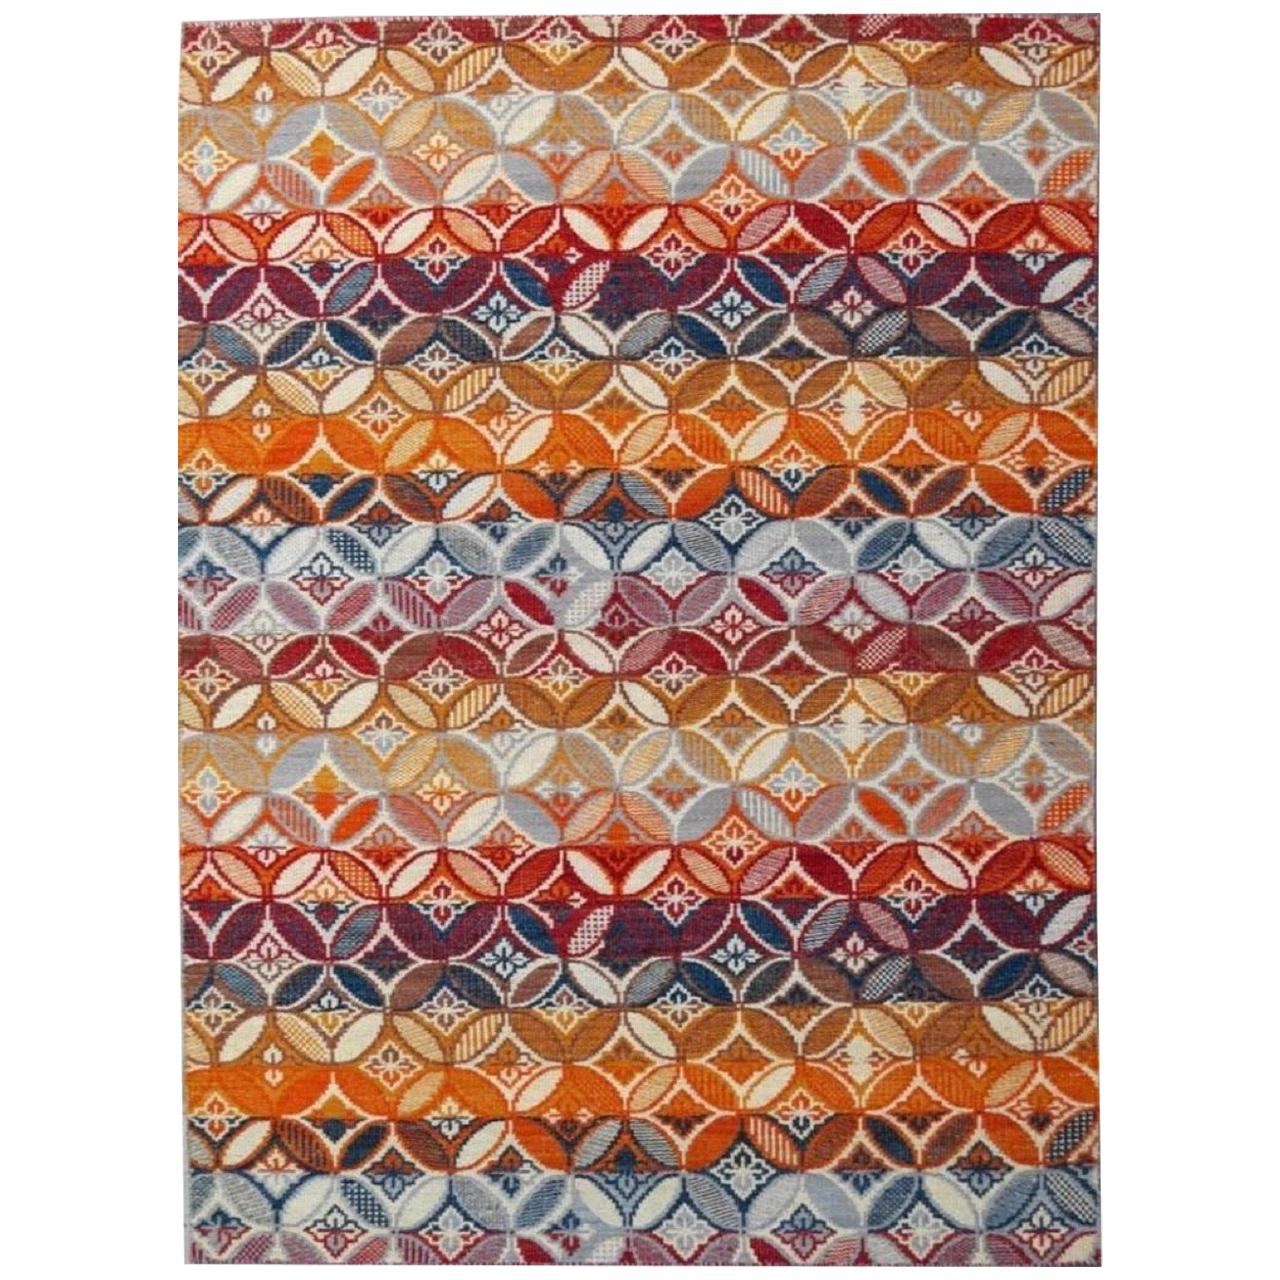 Beautiful New Handwoven European Design Flat Kilim Rug size 6ft 6in x 9ft 10in For Sale